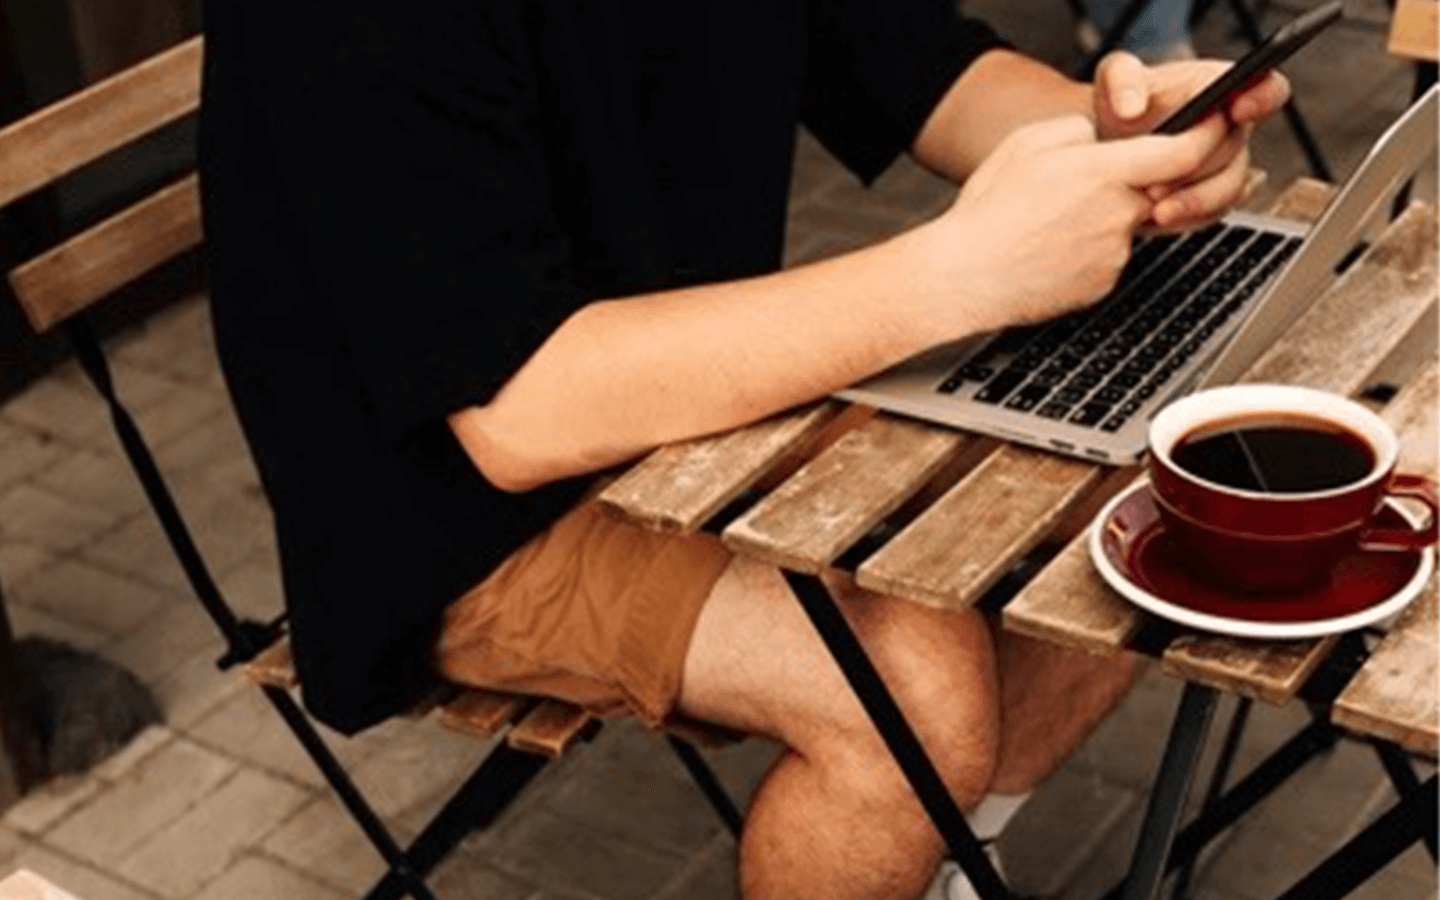 Young man sitting at his laptop while using his phone with a cup of coffee (an anxiety inducing stimulant) placed nearby